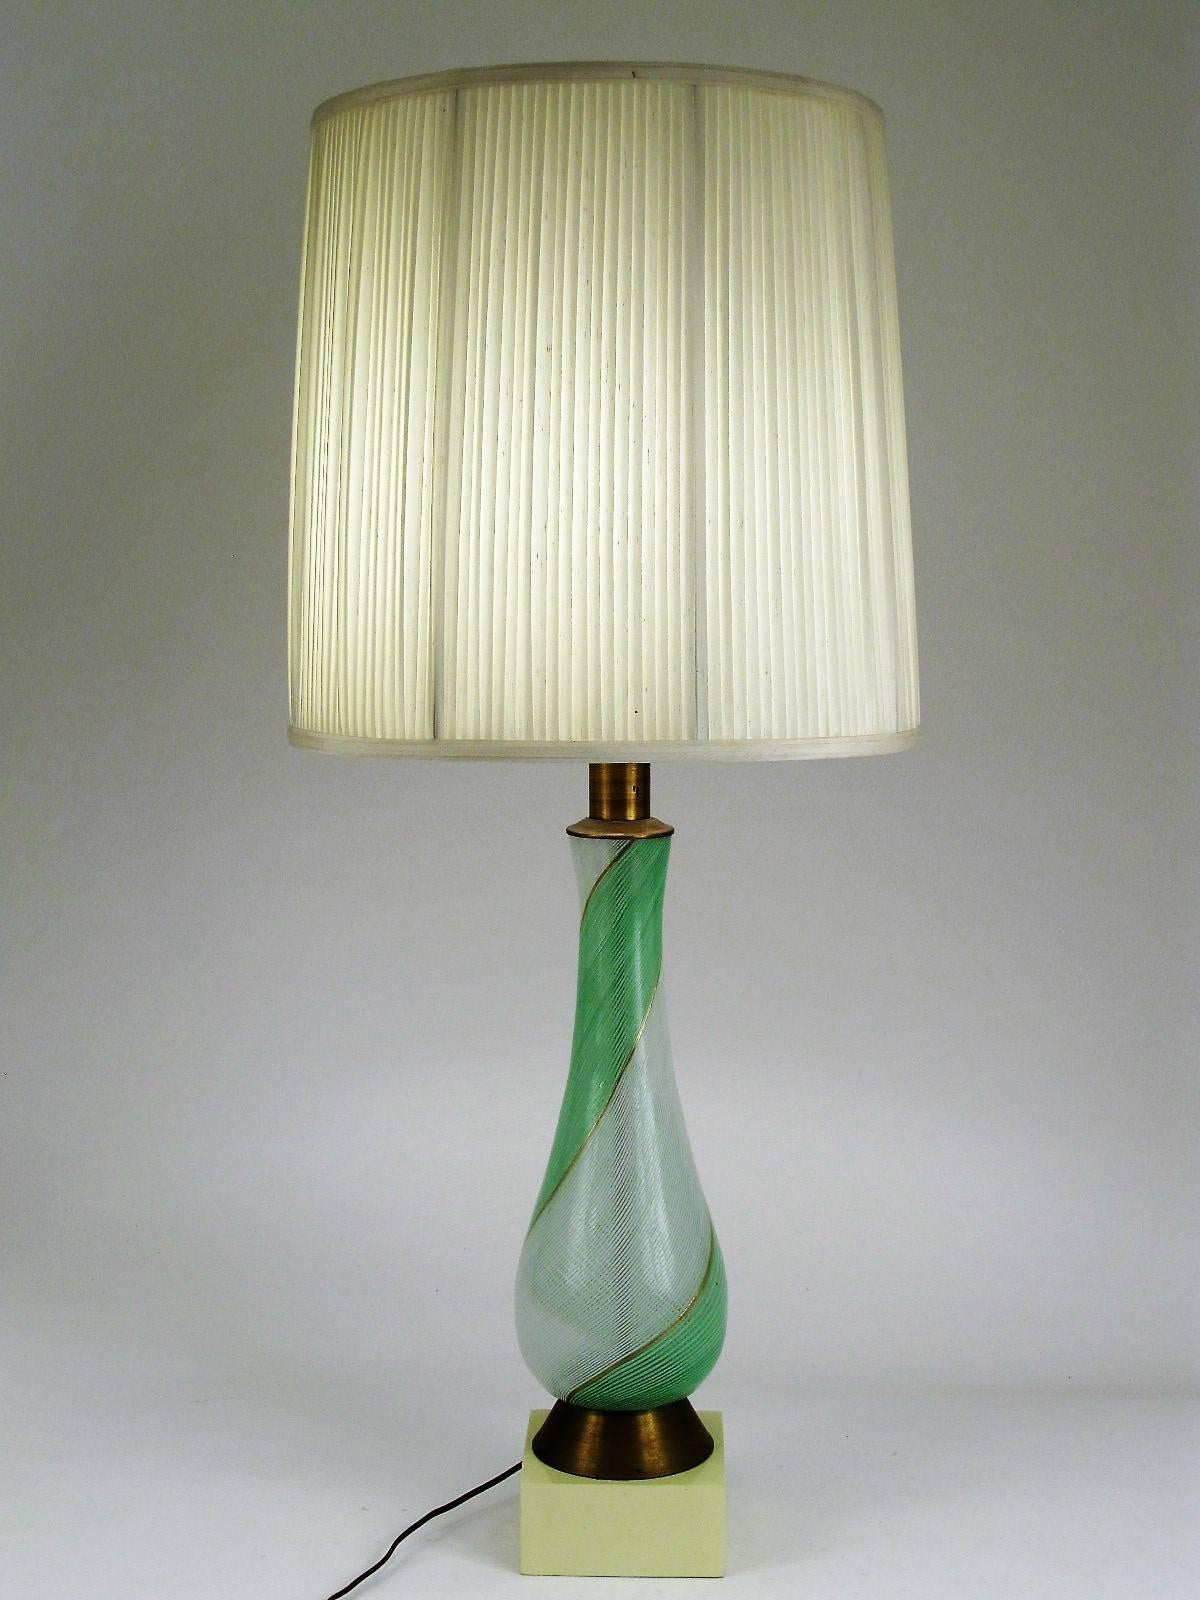 Spiral Twist Fine Murano Glass Table Lamp In Excellent Condition For Sale In Papaikou, HI